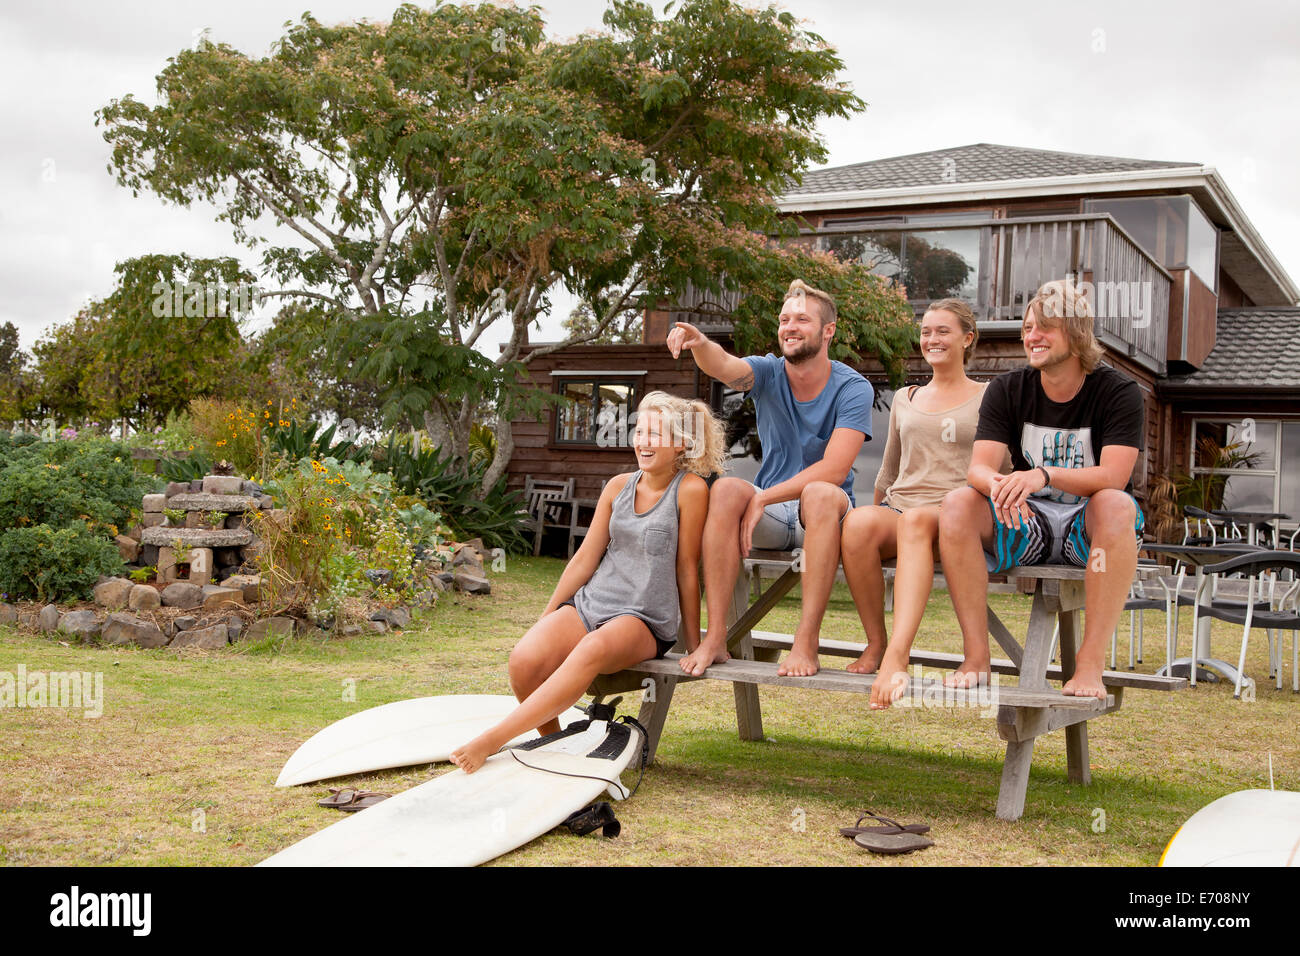 Four surfer friends sitting on picnic bench Stock Photo